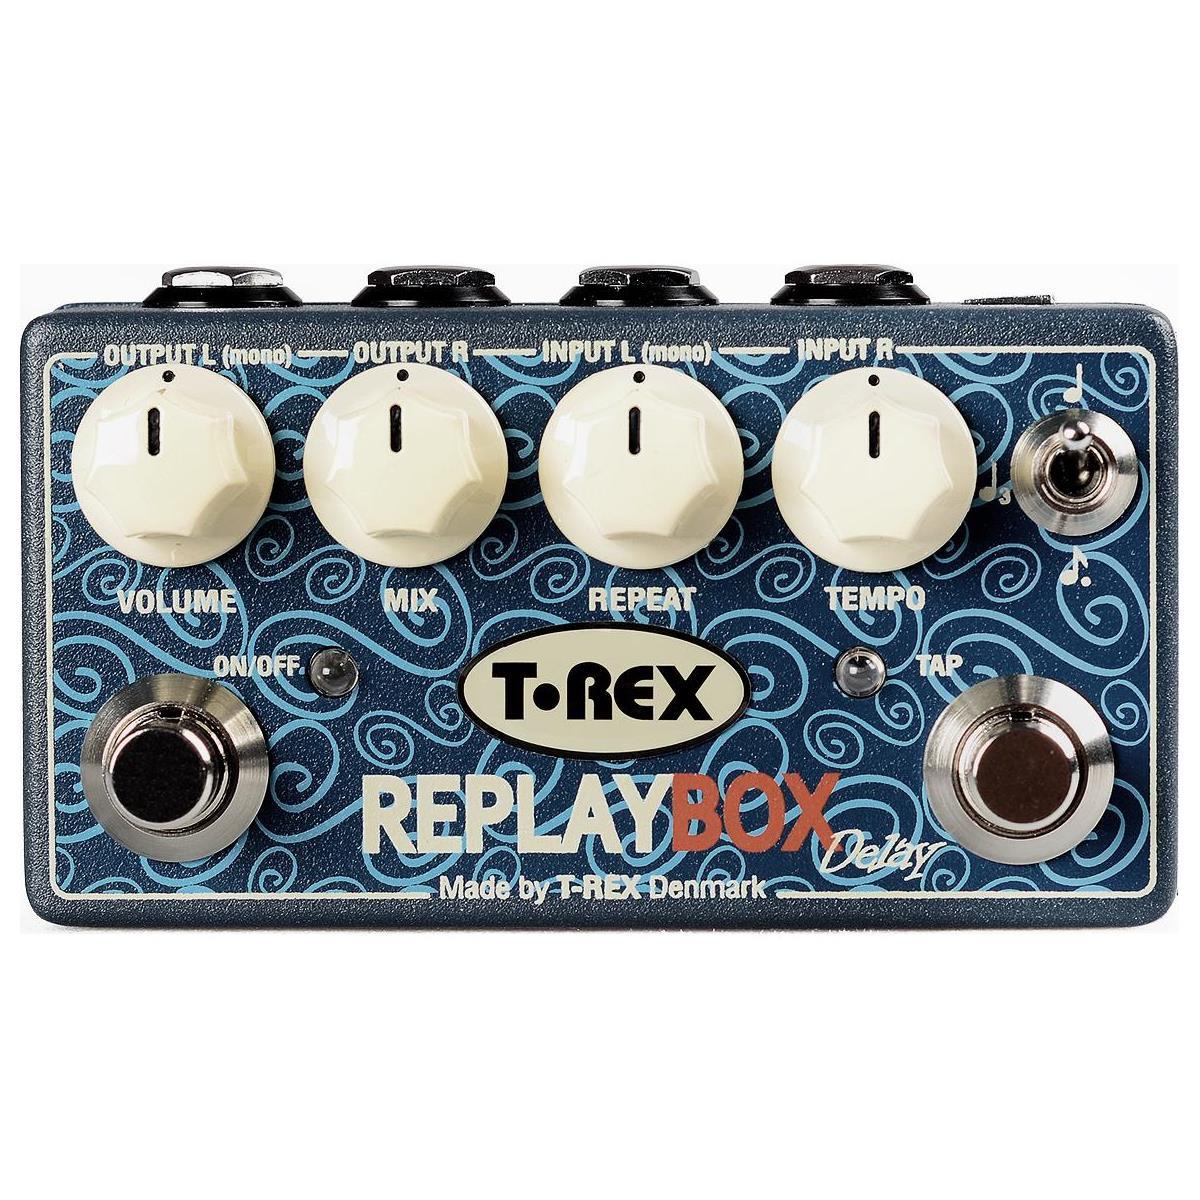 Image of T-Rex Engineering REPLAY-BOX Stereo Delay Pedal with Tap Tempo